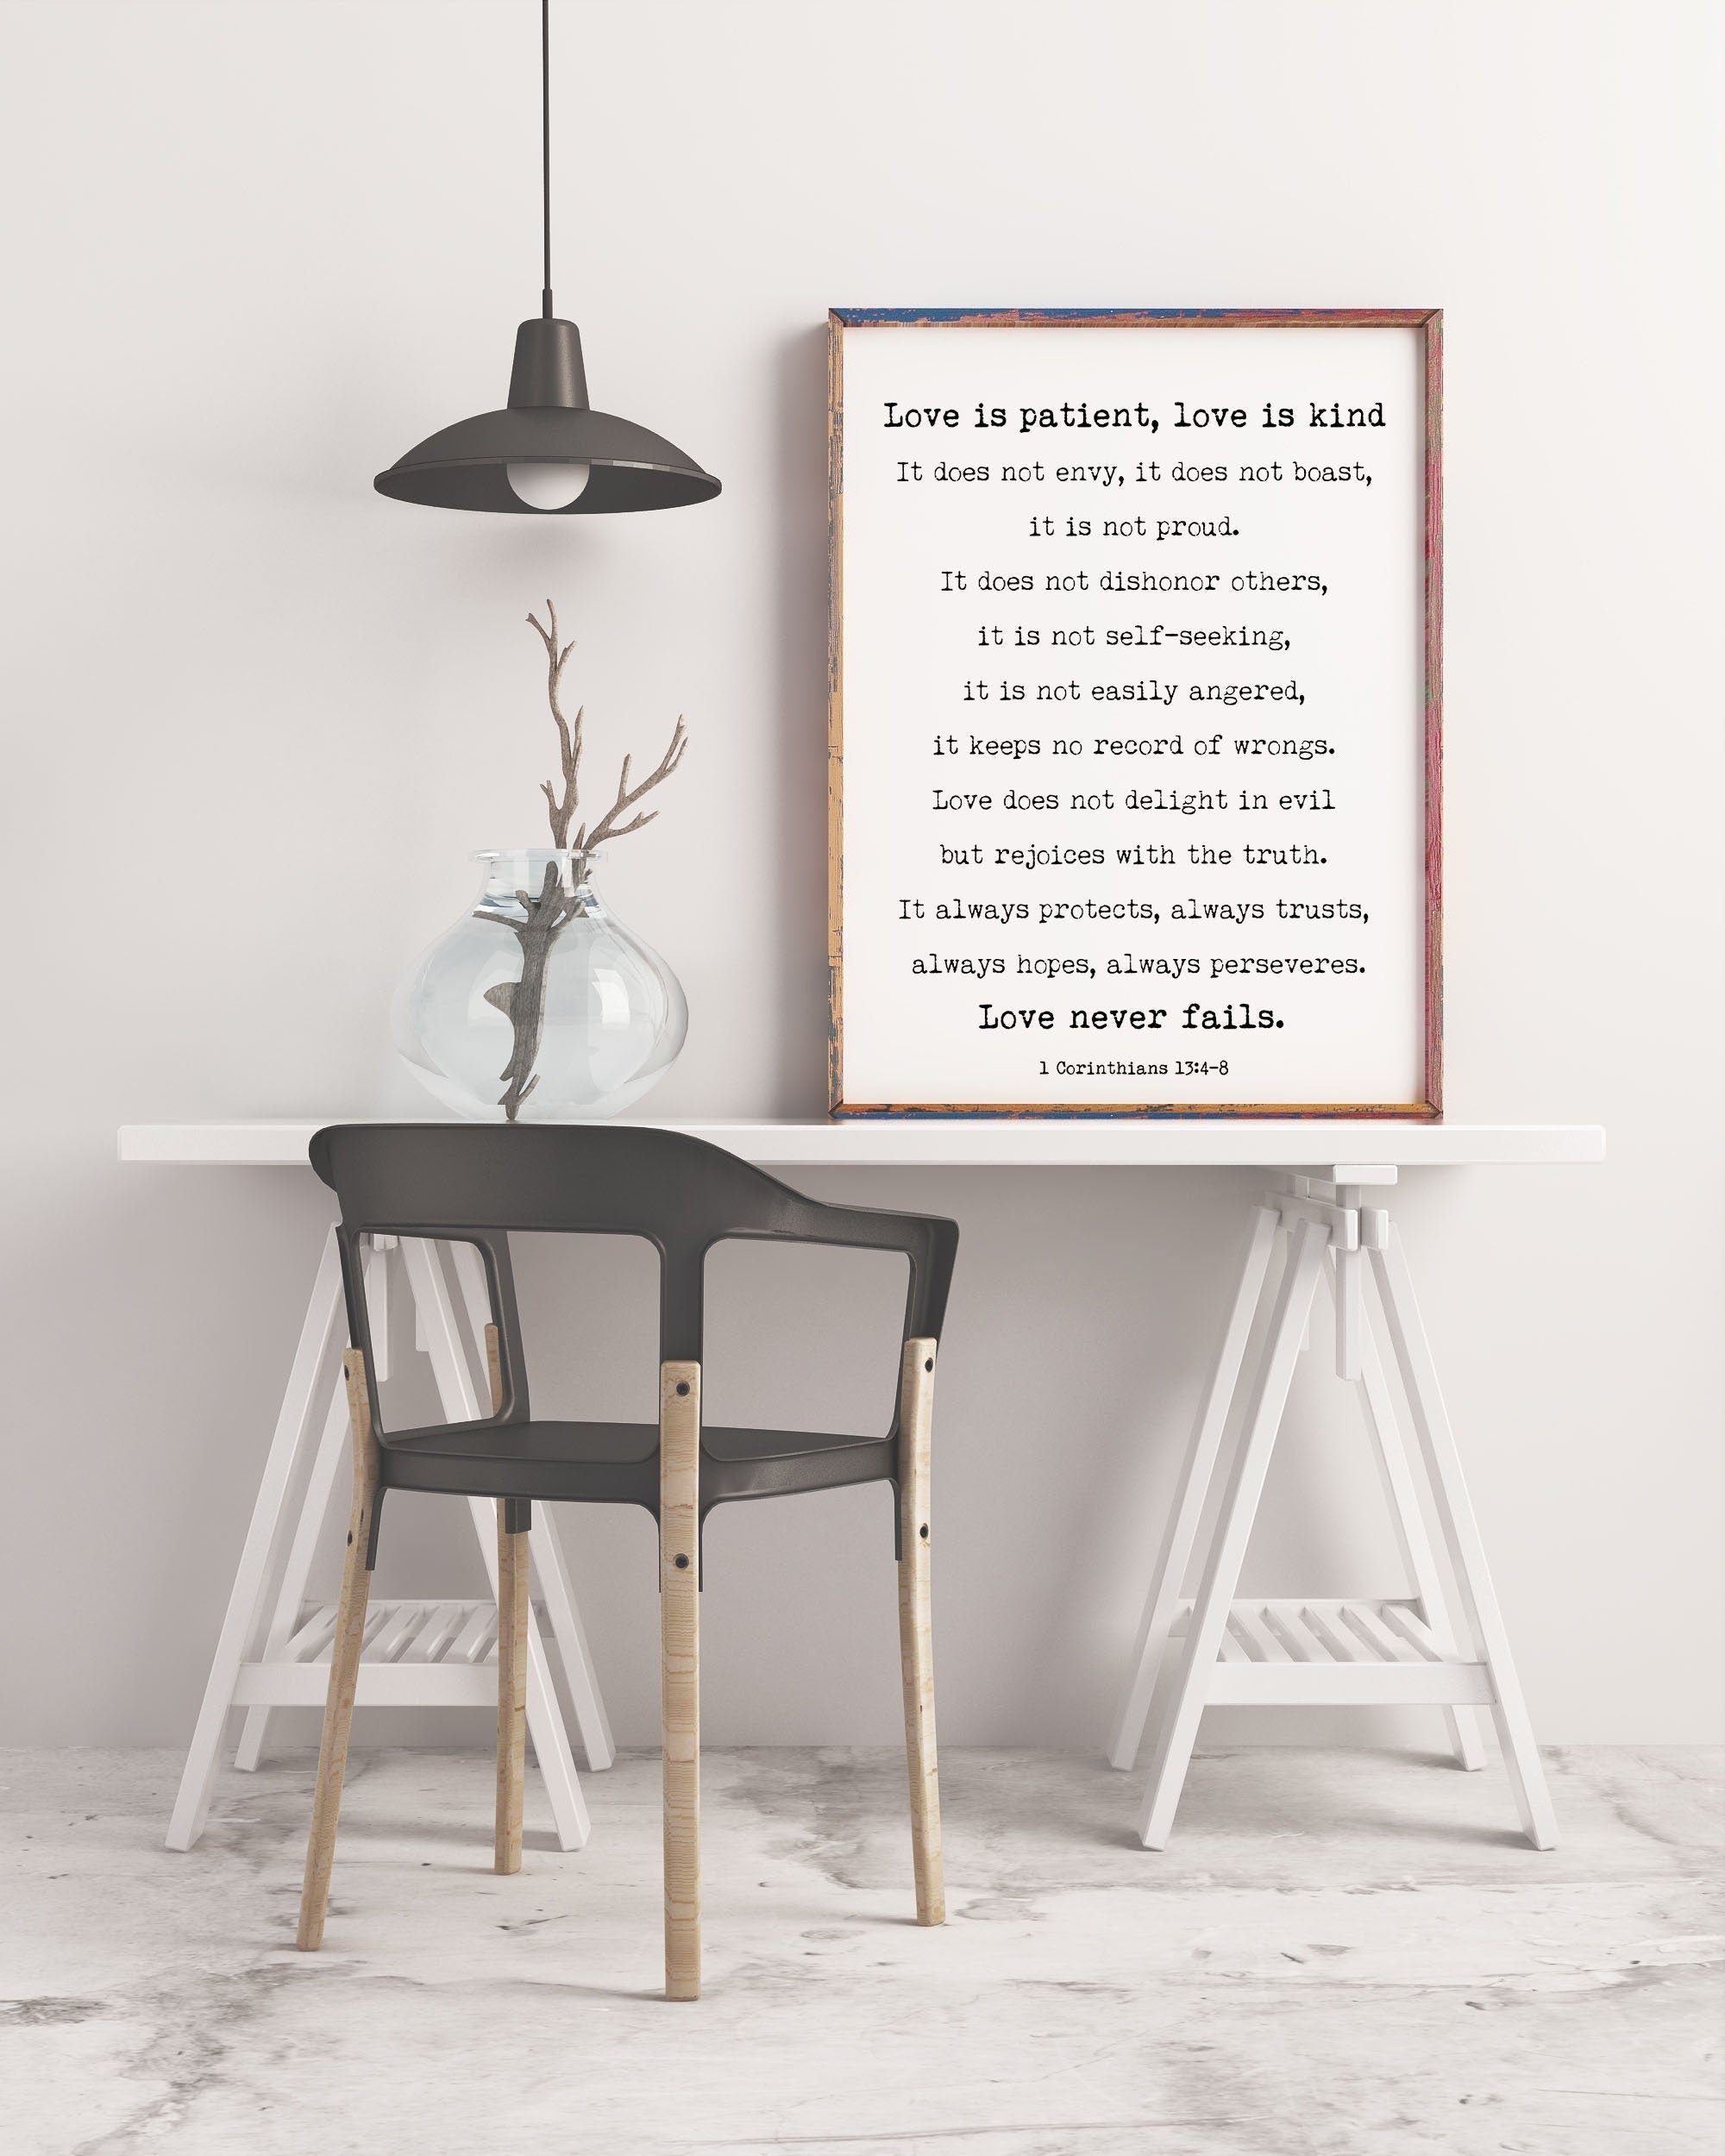 Corinthians 13 Quote Print, Love is Patient Love Never Fails Wall Art Print in Black & White